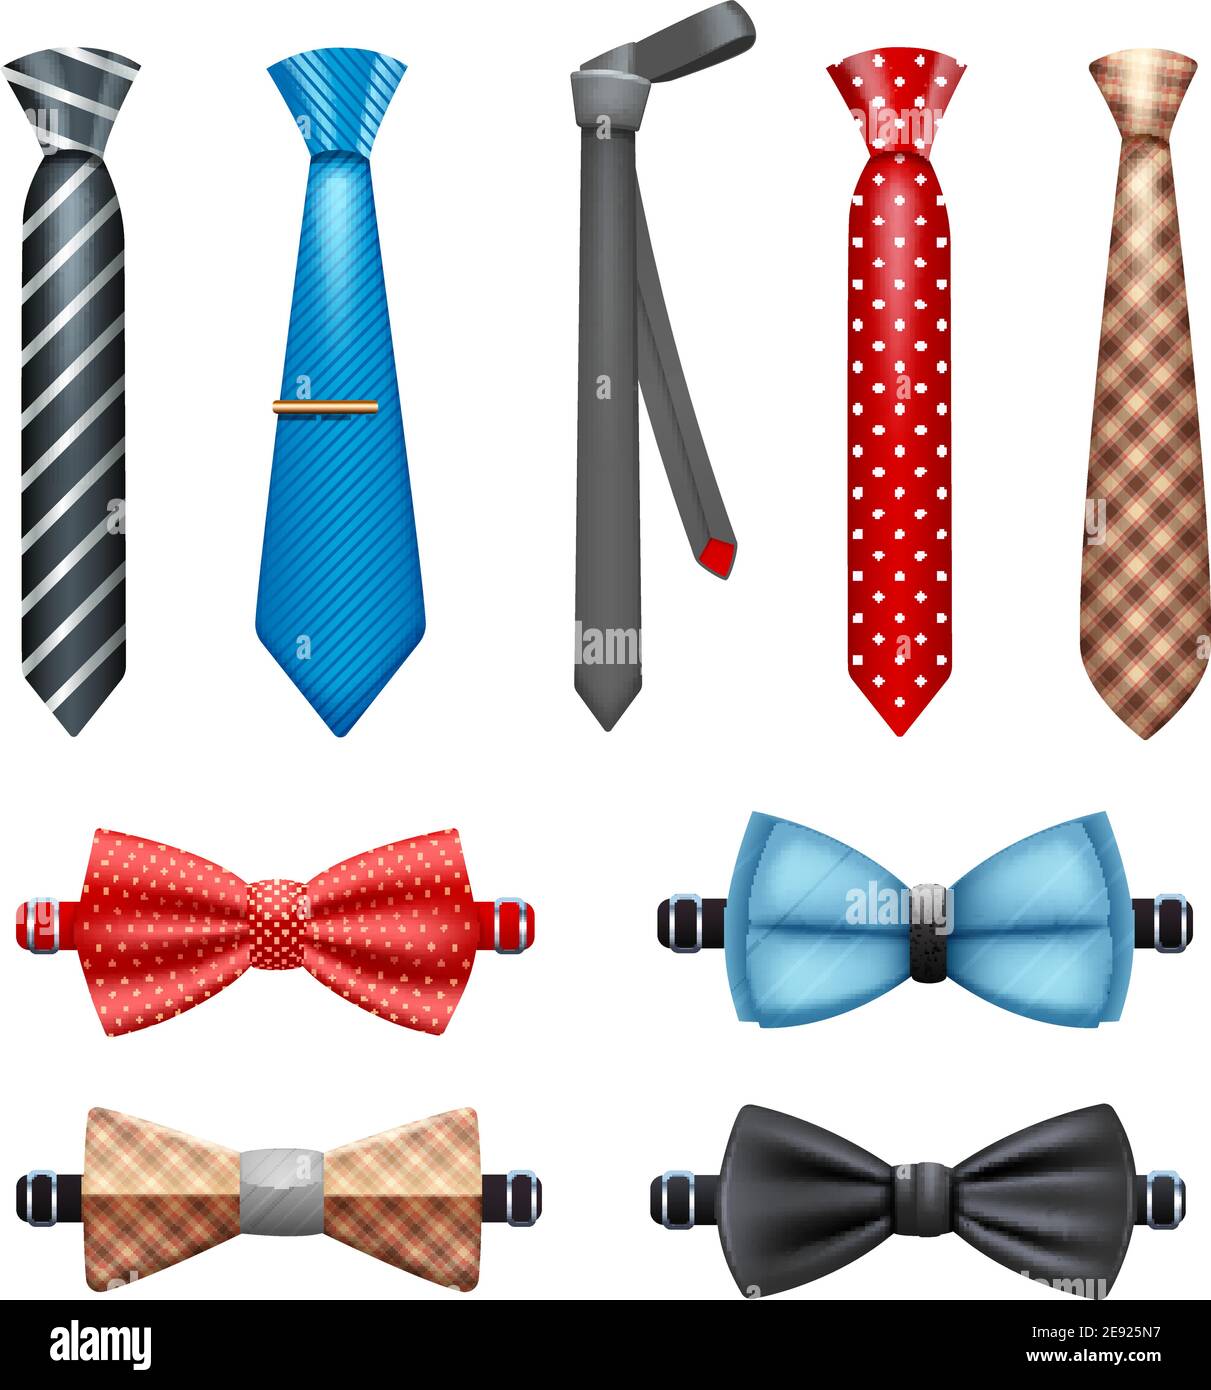 Tie and bow tie realistic set in different shapes and colors isolated vector illustration Stock Vector